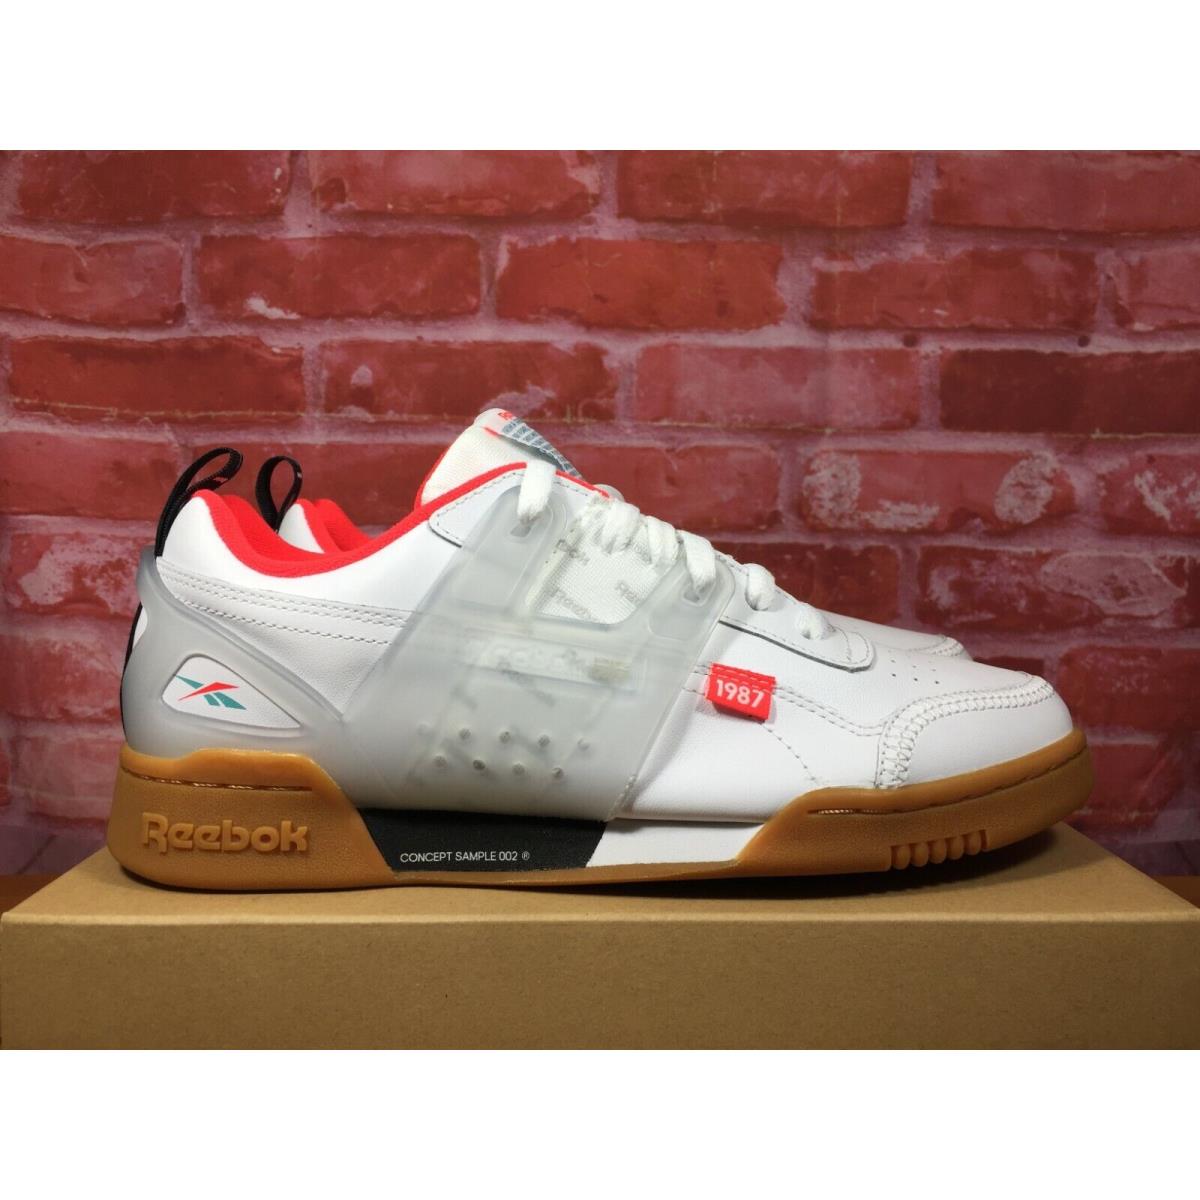 Reebok Workout Plus Altered DV5243 White/red Shoes Alter The Icon C1 Sizes